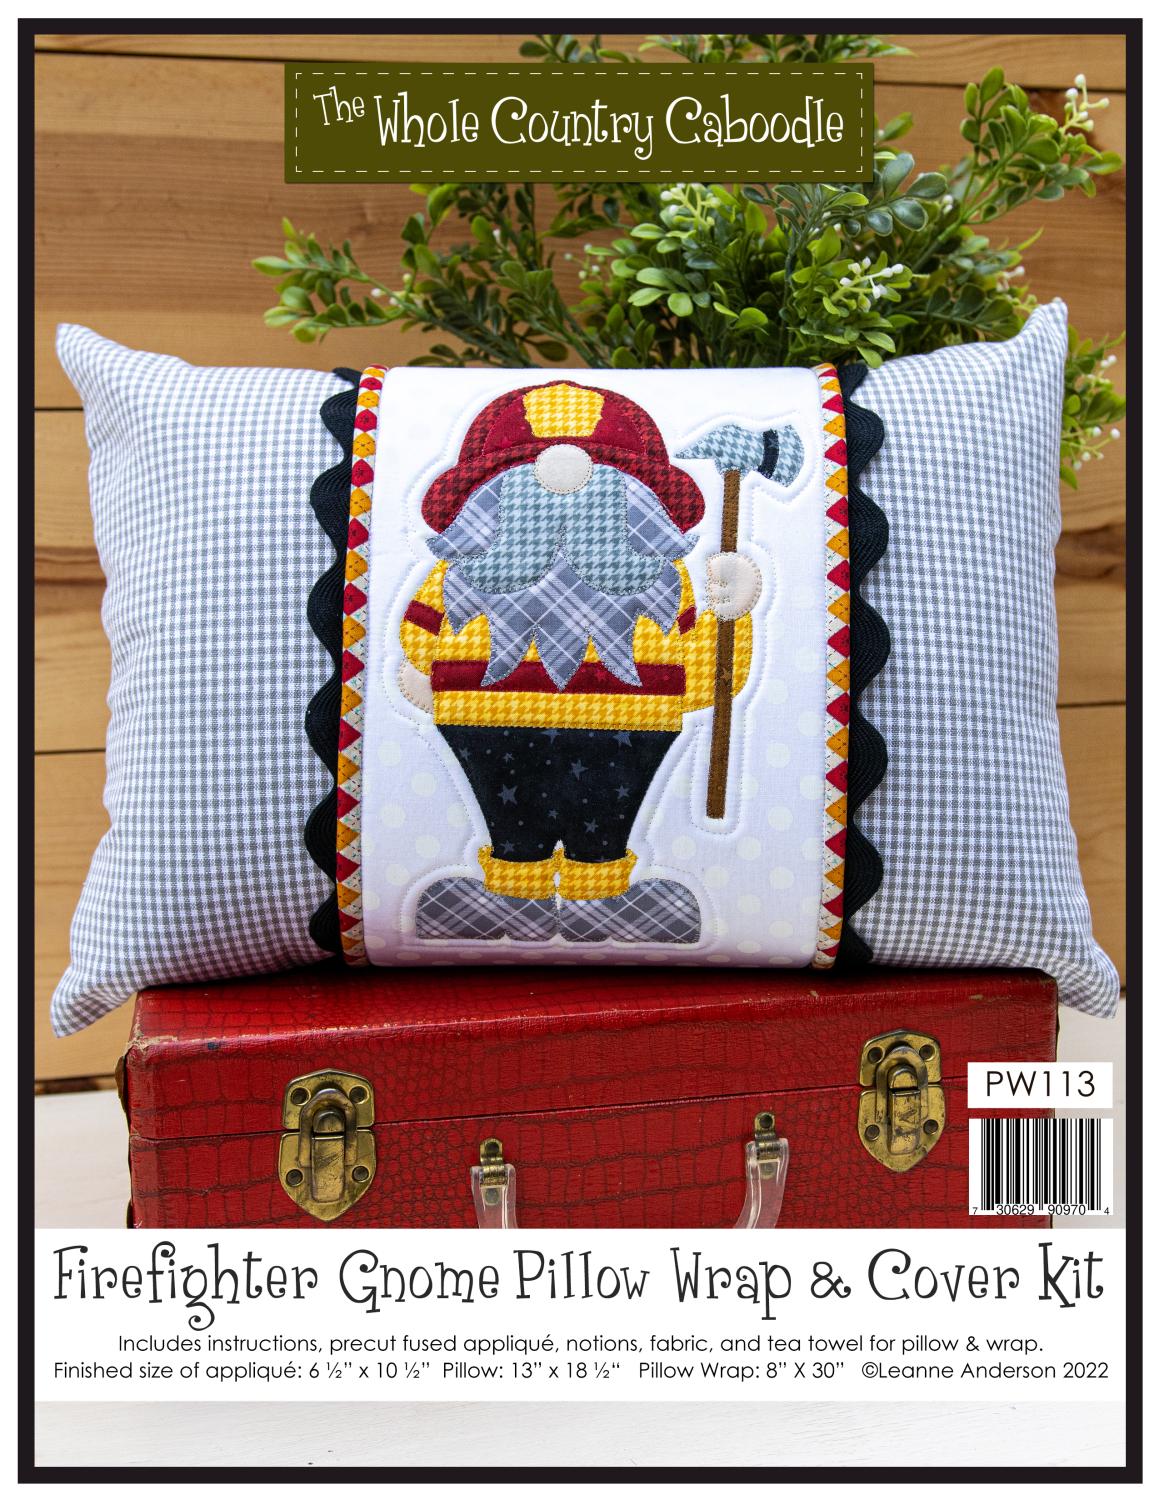 Firefighter Gnome Pillow Wrap & Cover